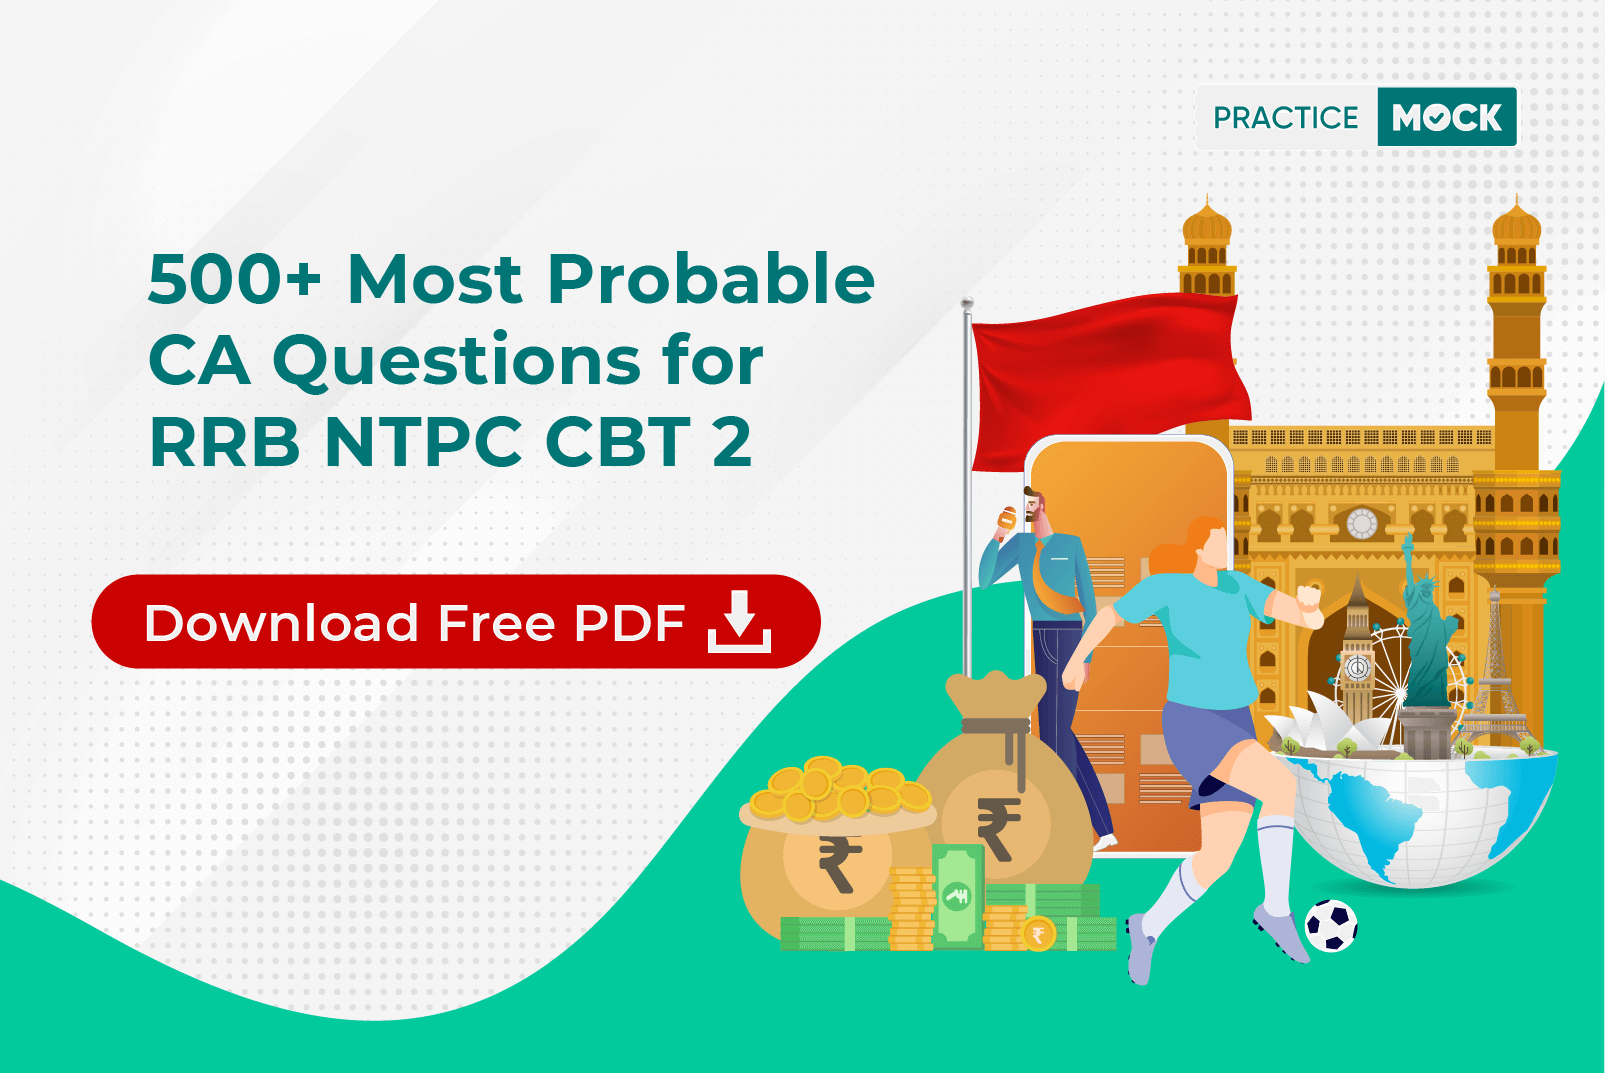 500+ Most Probable CA Questions for RRB NTPC CBT 2- Download Free PDF